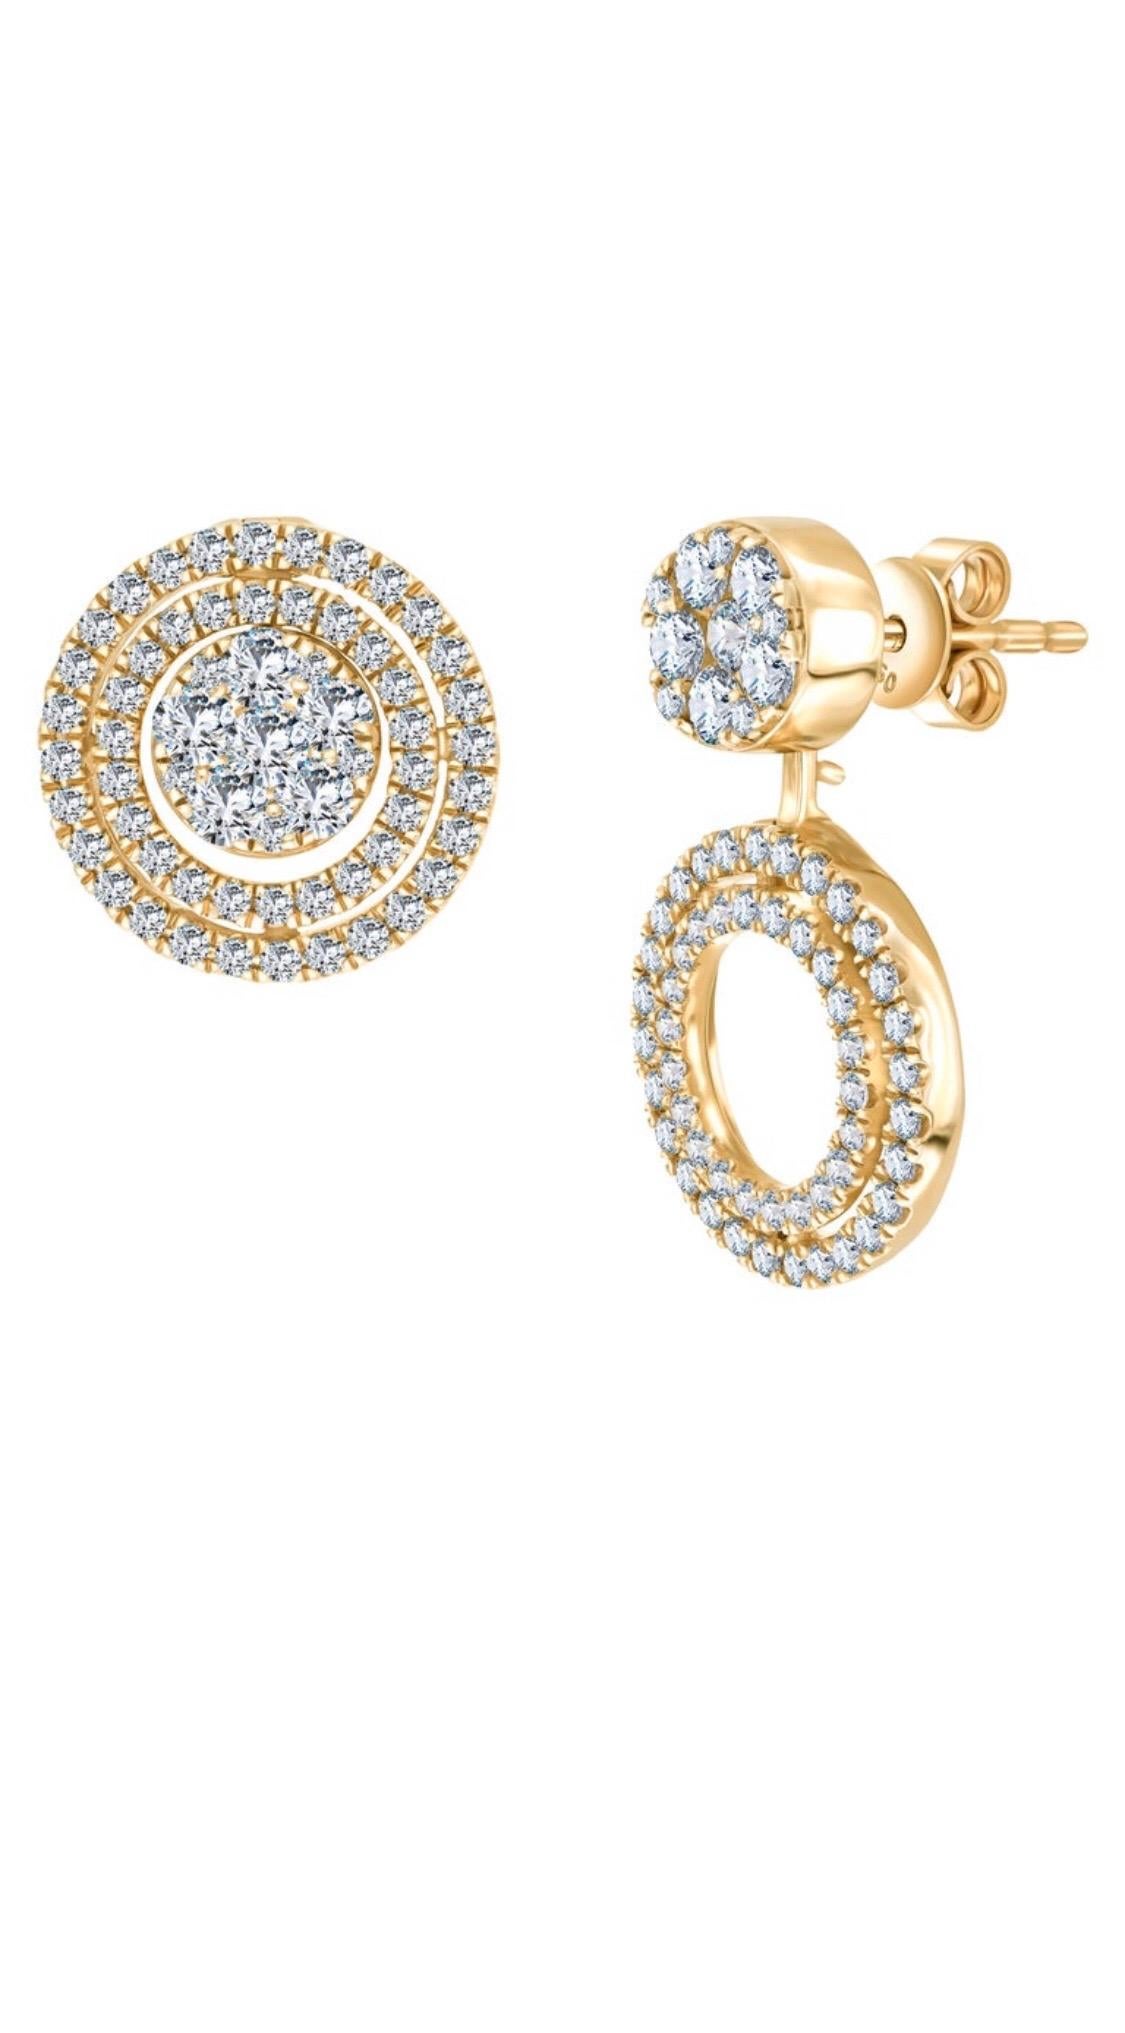 Versatile micro set 18k yellow gold earrings with 3 rows of concentric circles all intricately laced in 1.00ct round brilliant H-SI white diamonds. These earrings can be used as studs or as drop earrings, 3 looks. The weight of these earrings are